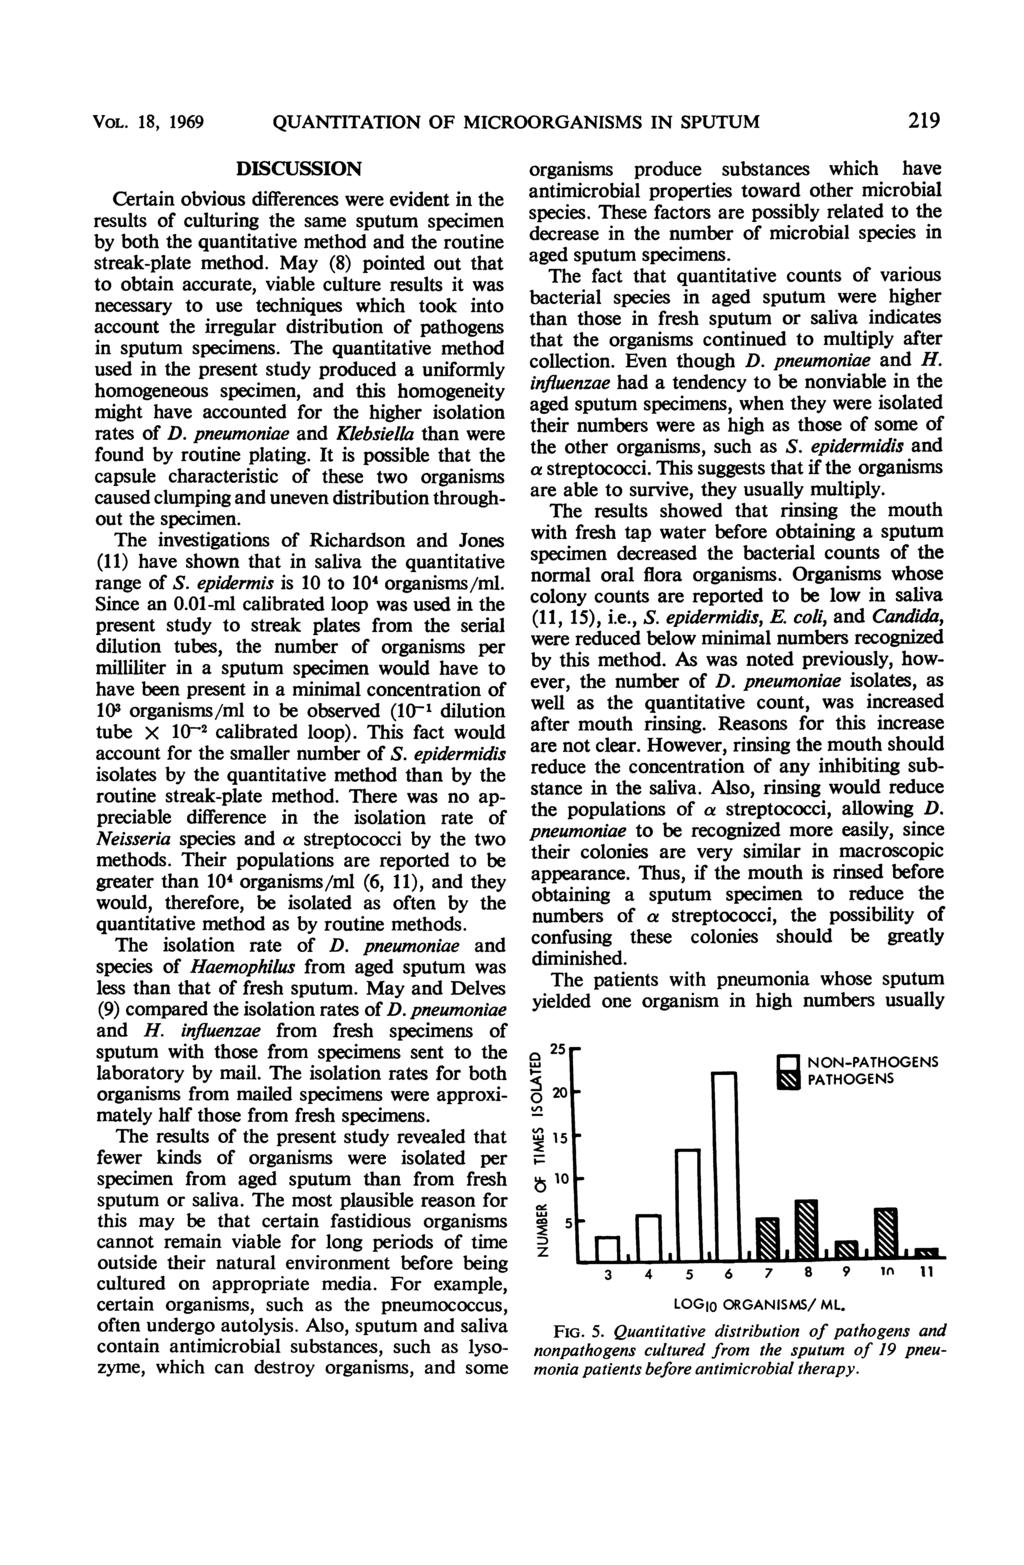 VOL. 18, 1969 QUANTITATION OF MICROORGANISMS IN SPUTUM 219 DISCUSSION Certain obvious differences were evident in the results of culturing the same sputum specimen by both the quantitative method and